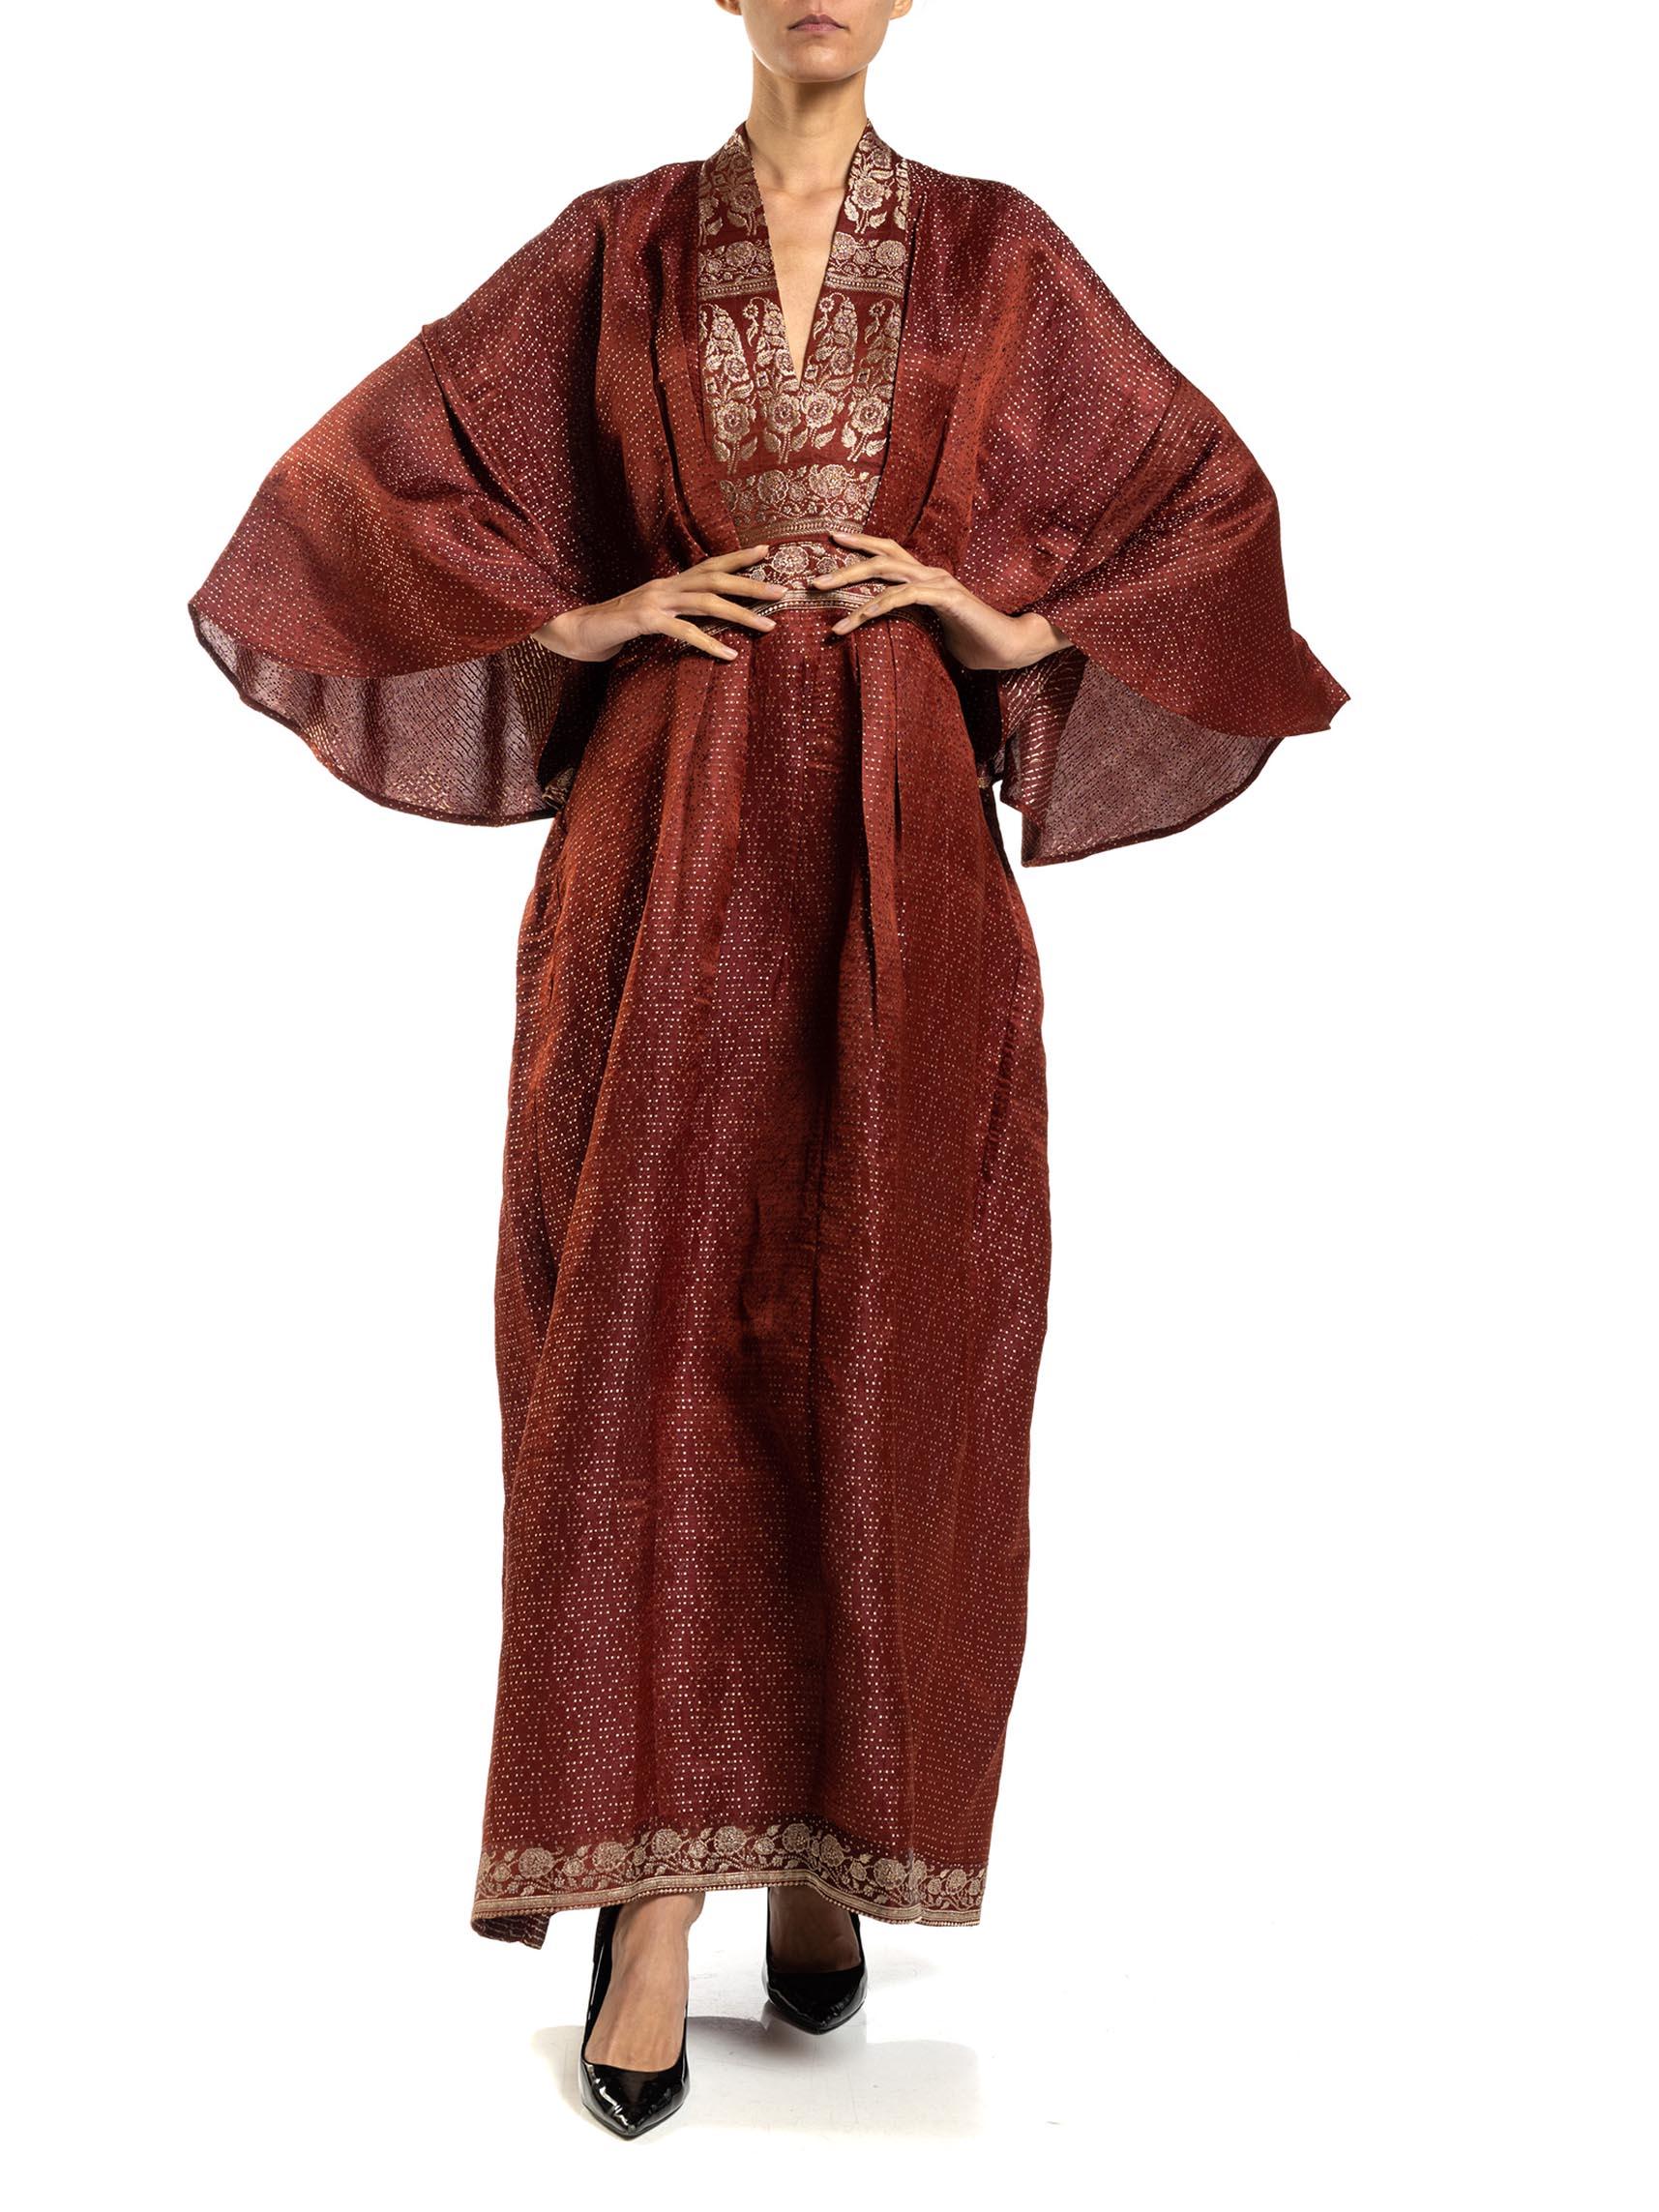 MORPHEW COLLECTION Burgundy Floral Silk Checkered Kaftan Made From Vintage Sari For Sale 1